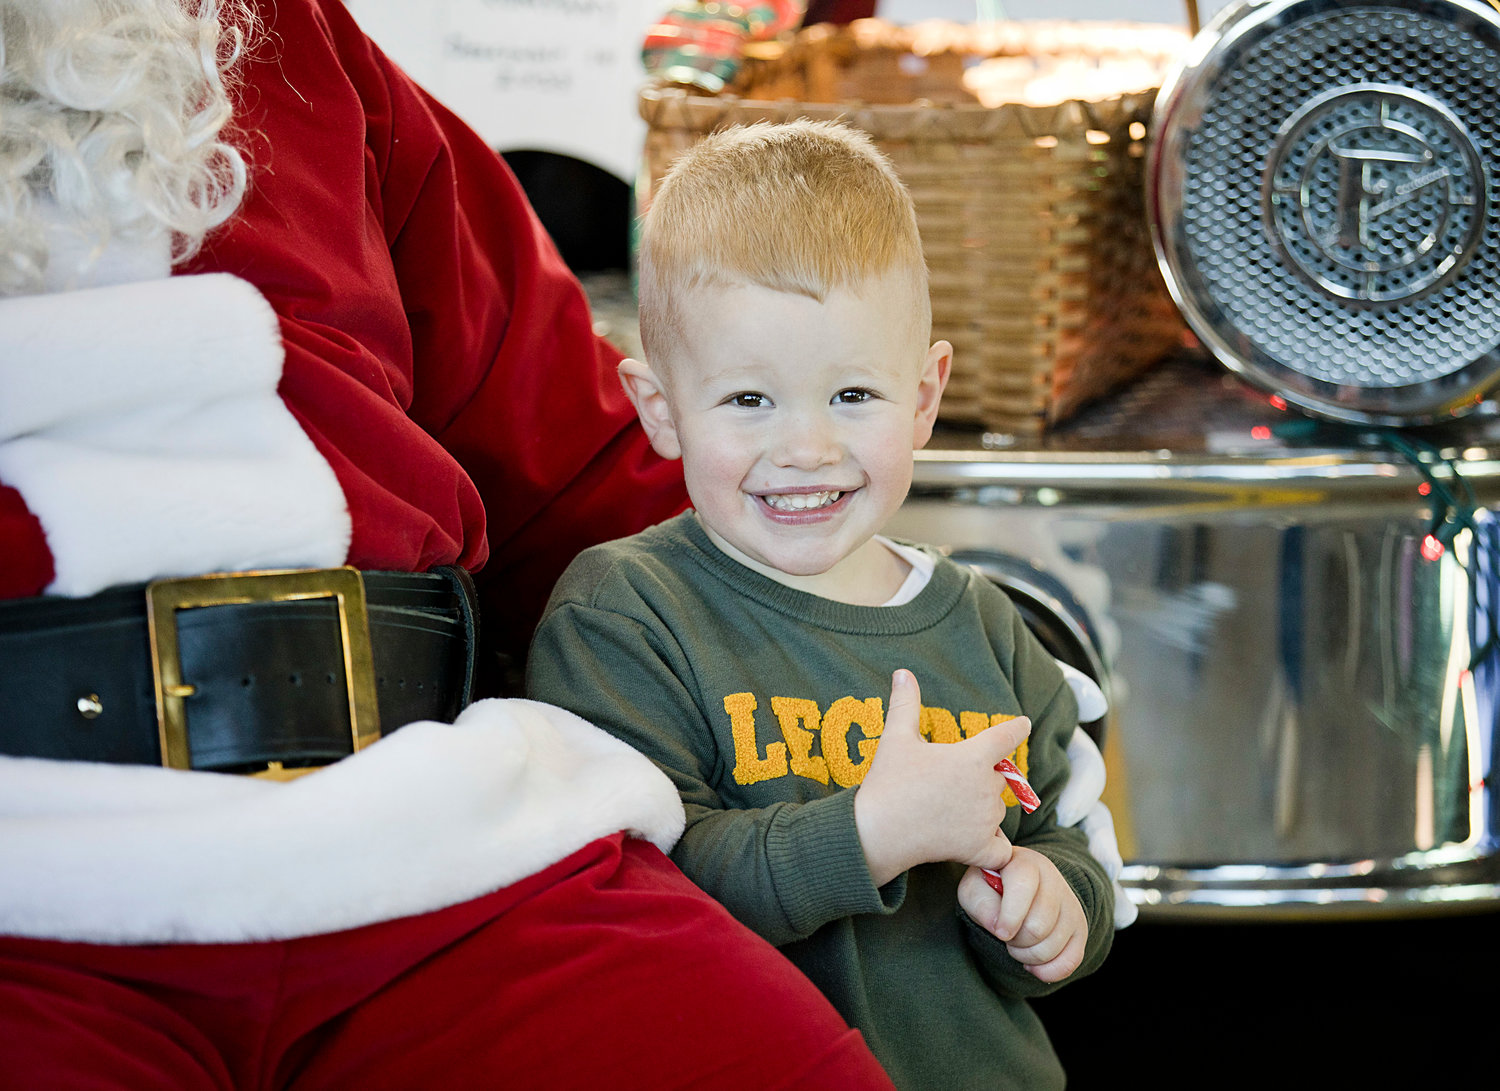 Ryan Barnowski beams with excitement after receiving a candy cane from Santa at Central Fire Company's "Breakfast with Santa" event, Sunday.